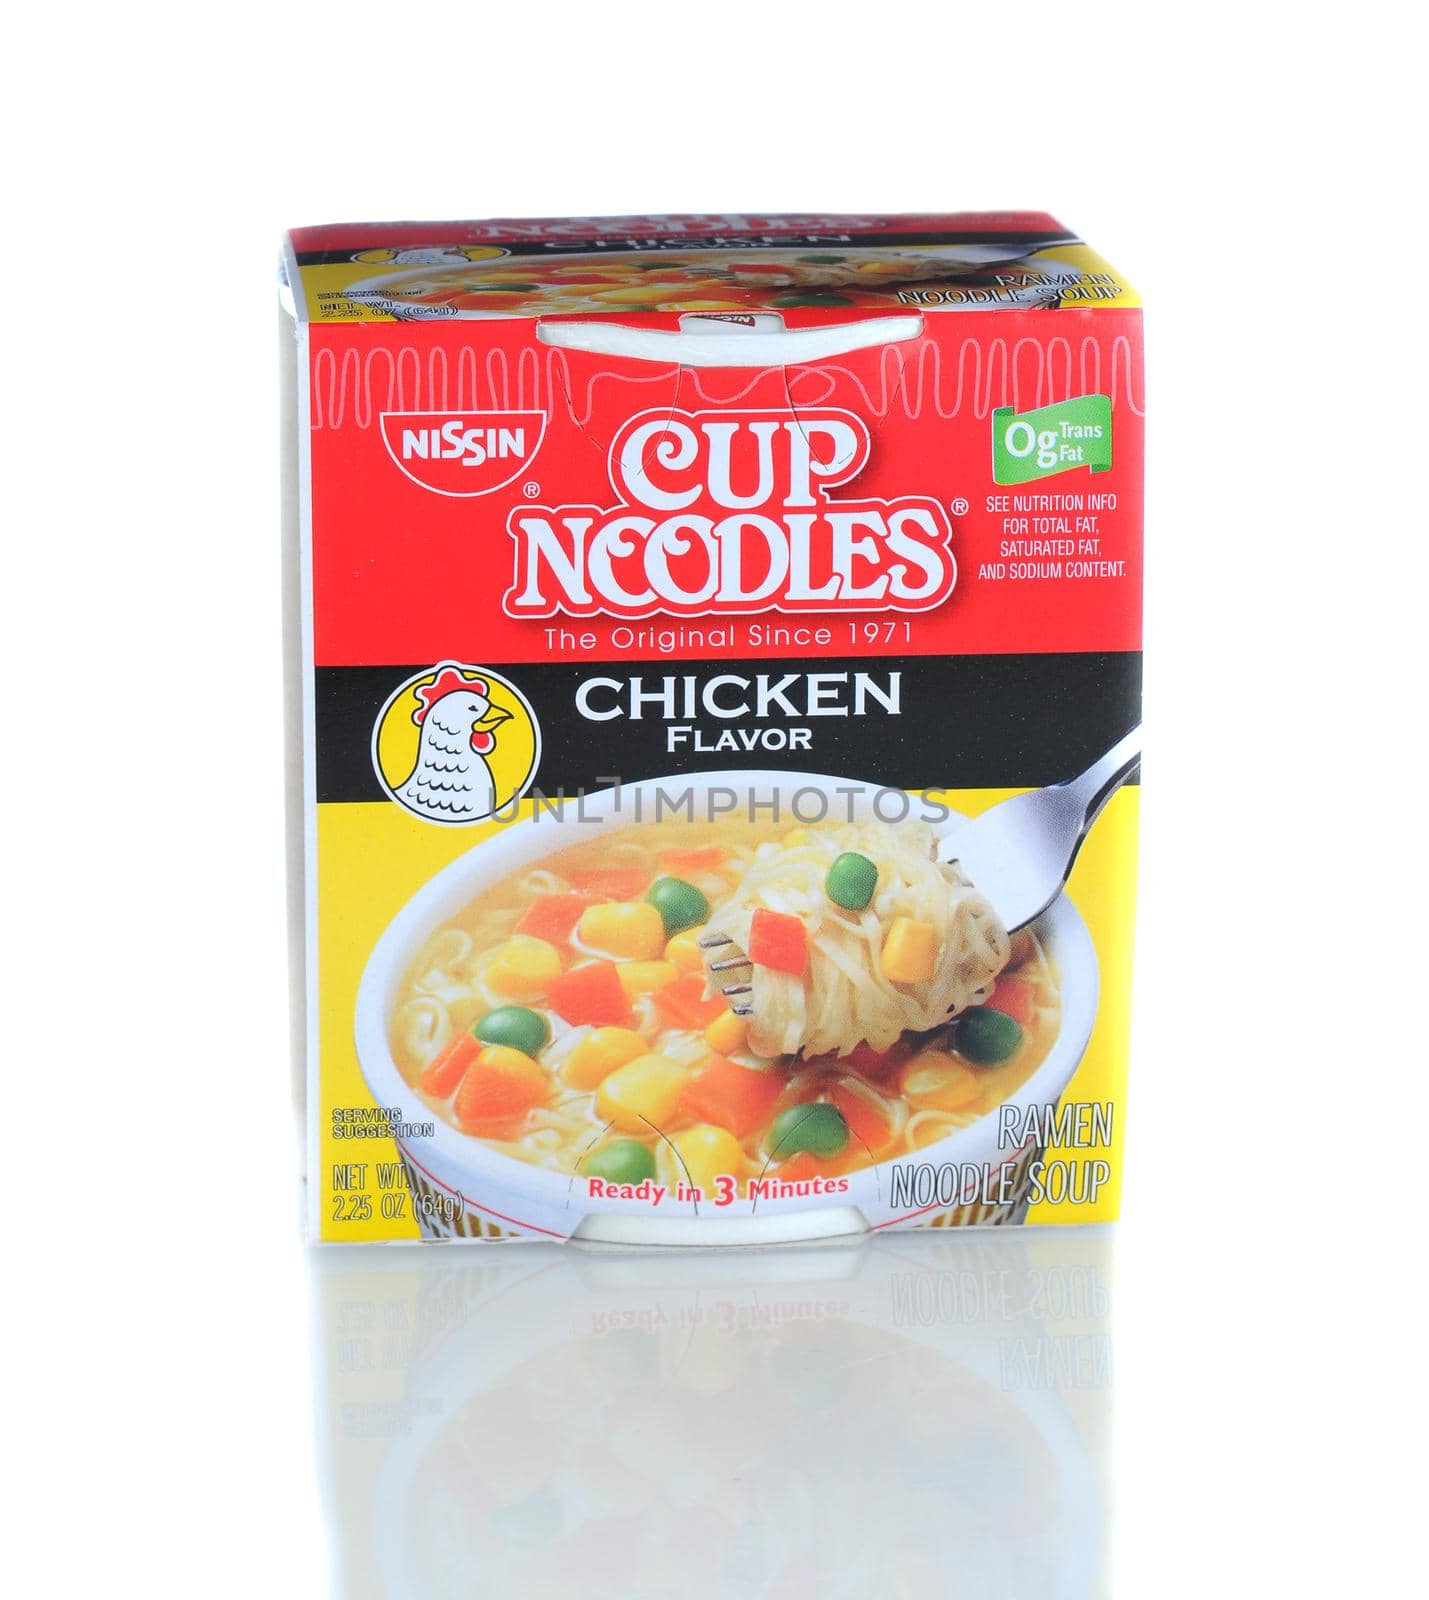 IRVINE, CA - January 21, 2013: A 2.5 ounce package of Cup Noodles Chicken Flavor. Manufactured by Nissin Foods, Cup Noodles has been a favorite ramen noodle since 1971.